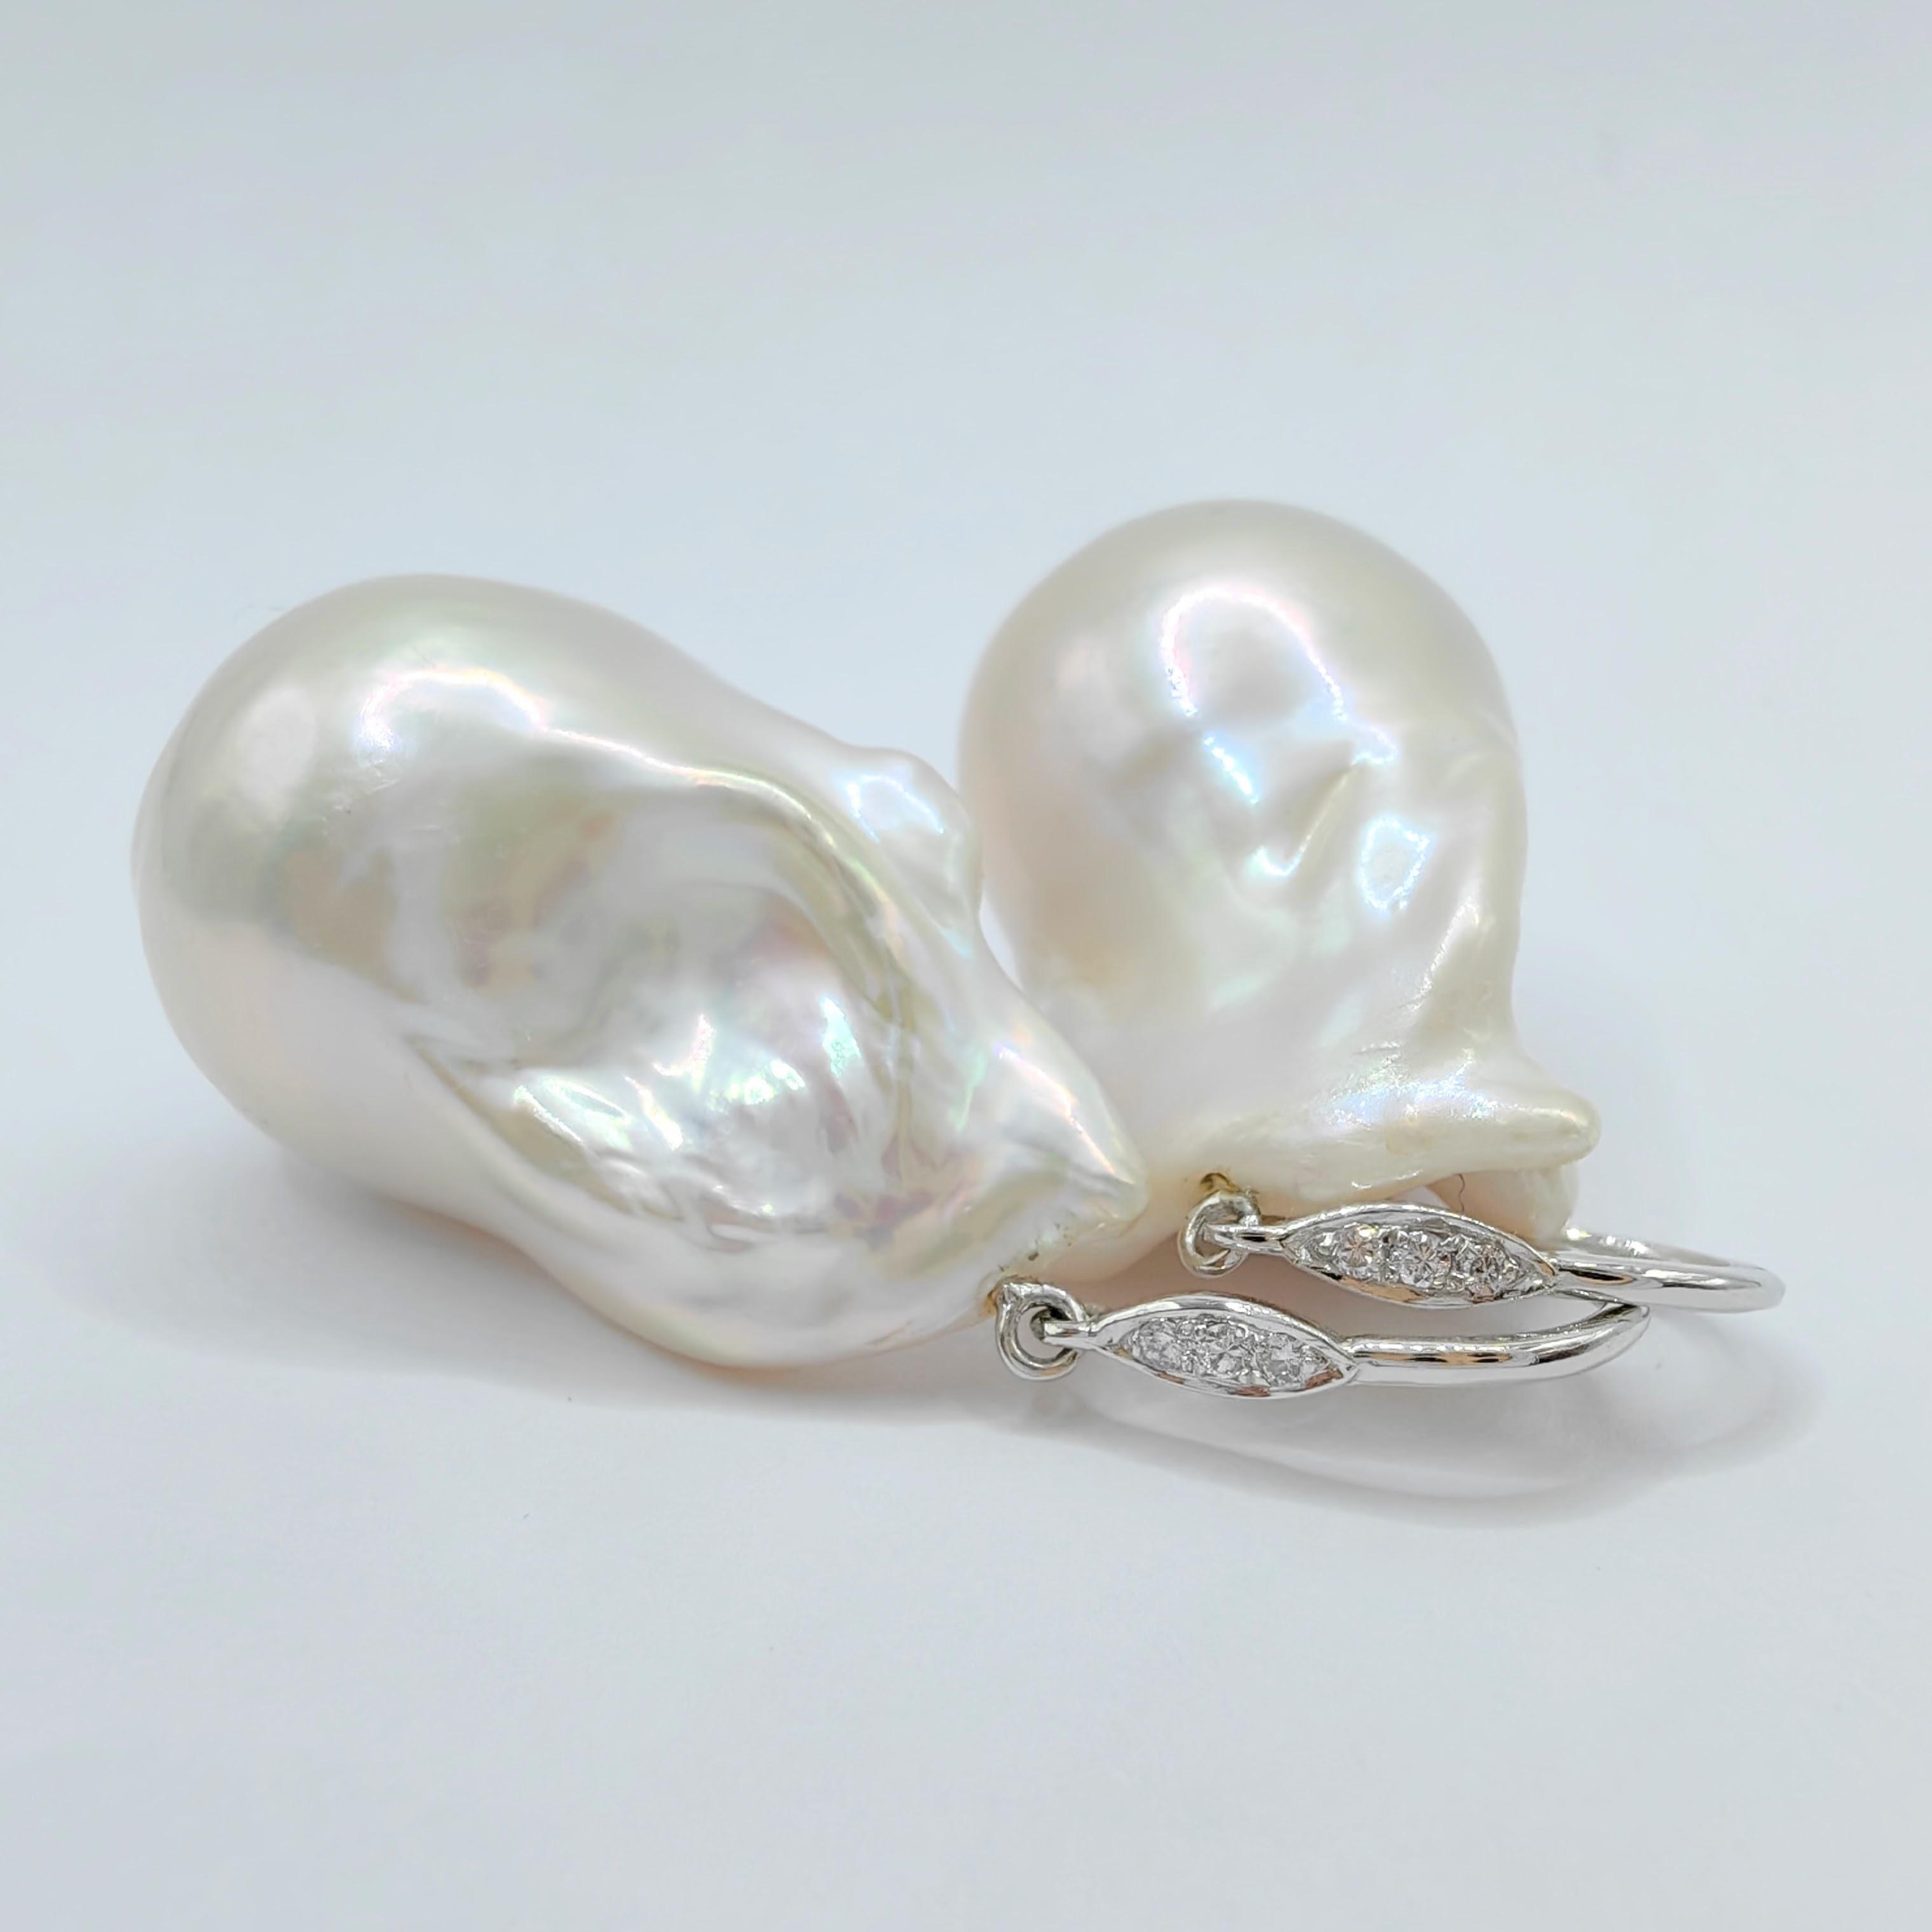 Baroque Pearl Diamond Dangling Drop Earrings With 18K White Gold French Hooks 2